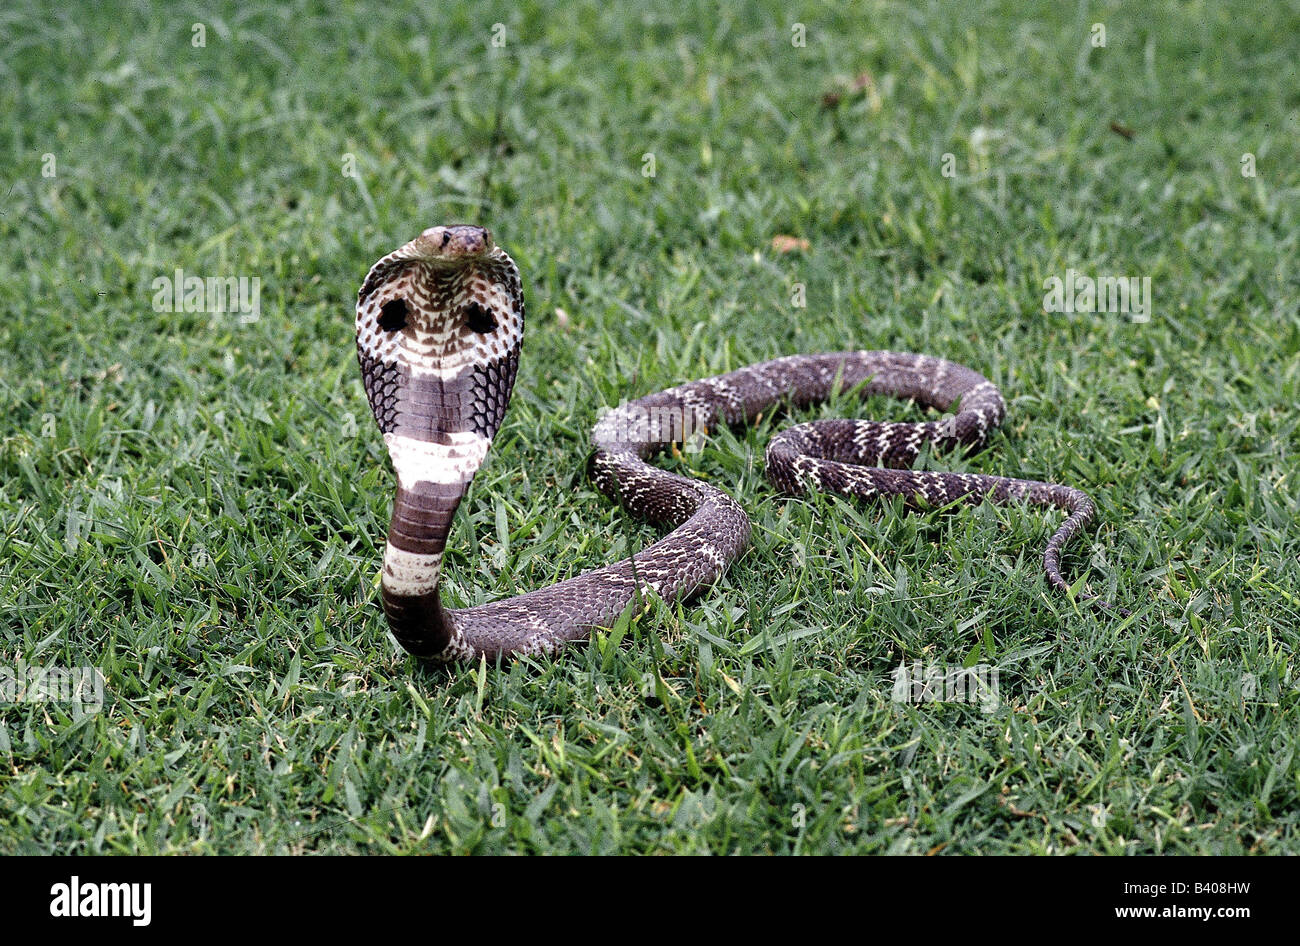 zoology / animals, reptiles, snakes, Indian Cobra, (Naja naja), two snakes convolved, one in basket, distribution: Central Asia Stock Photo